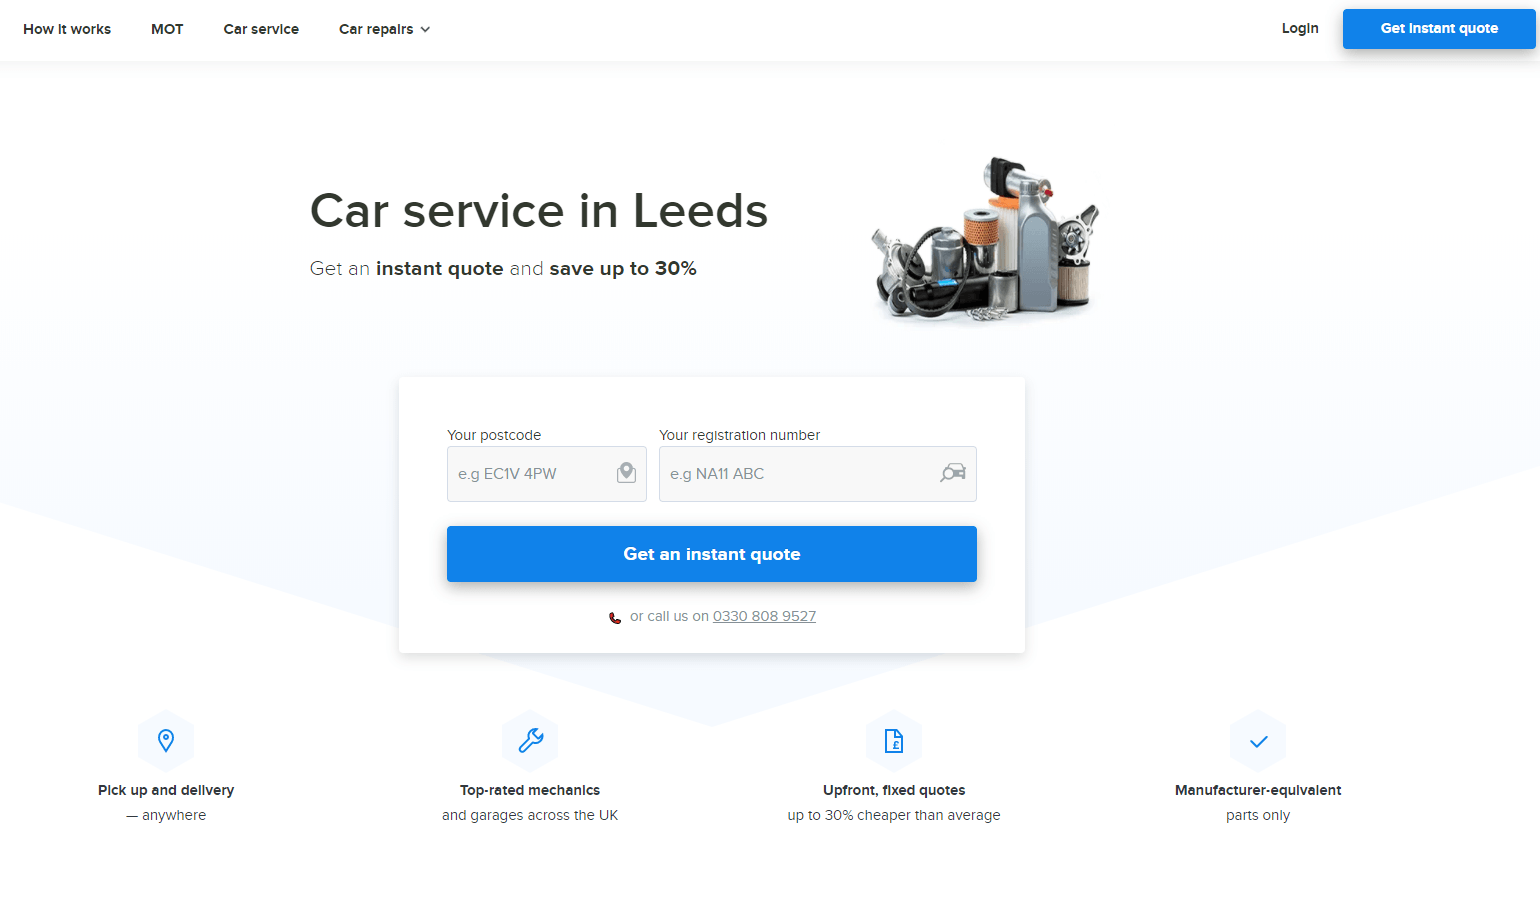 Fixter's website showing a location-focused landing page